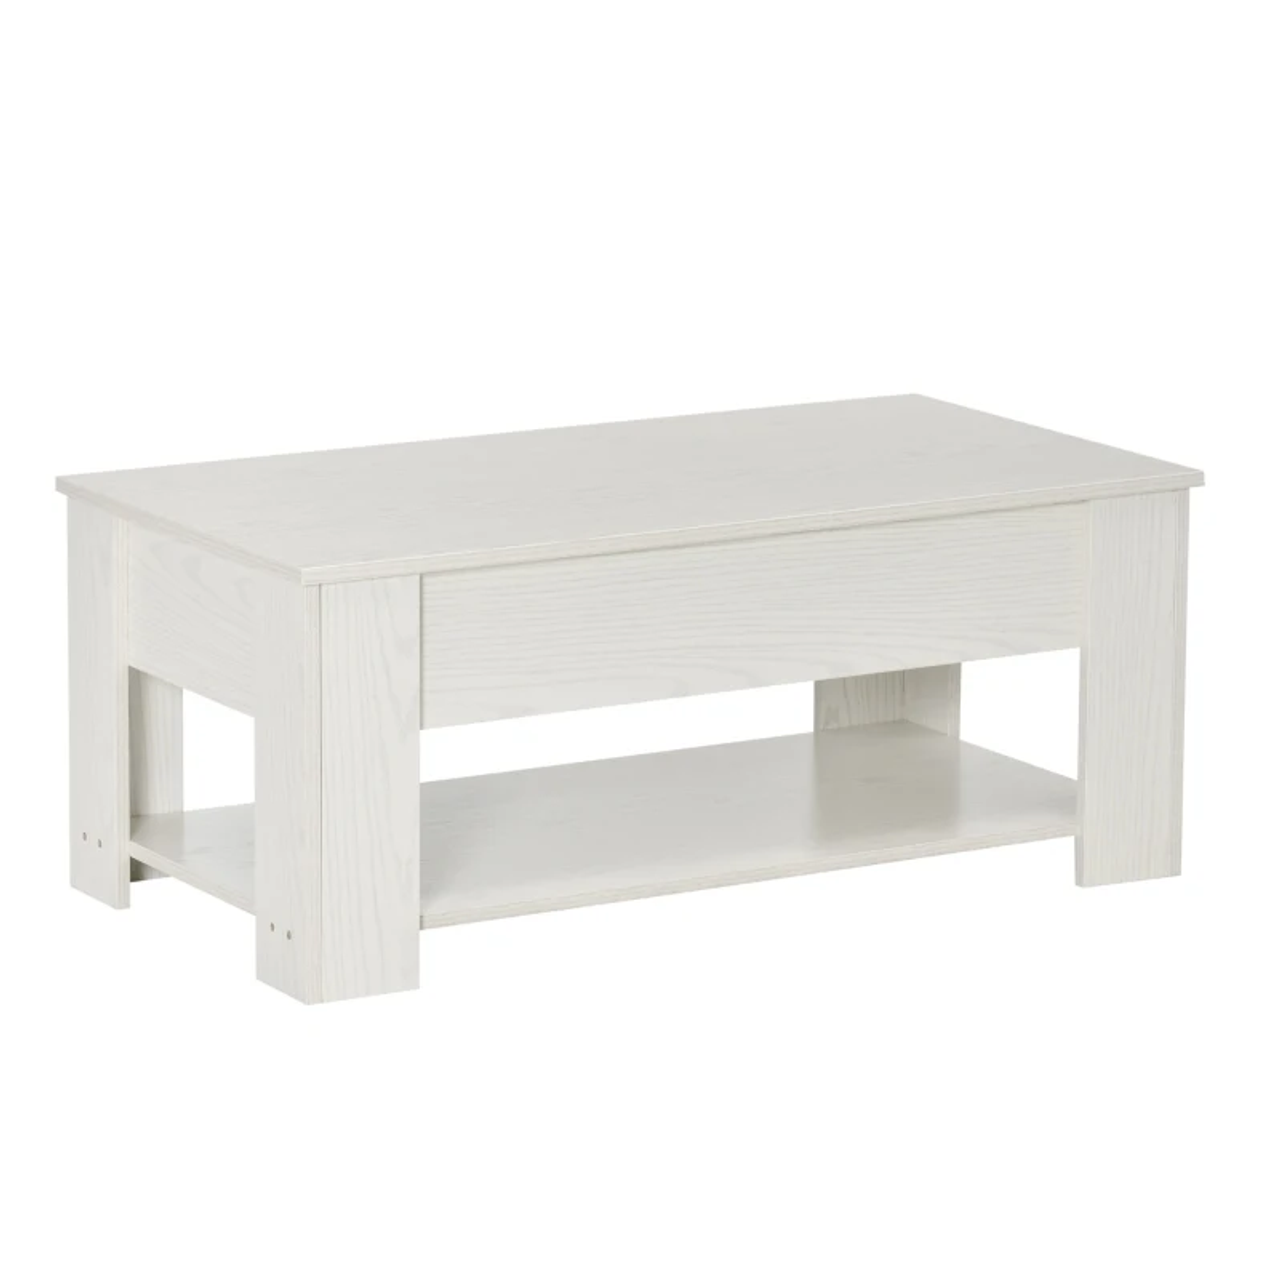 HOMCOM® Coffee Table with Lift-Top Hidden Storage Compartment product image